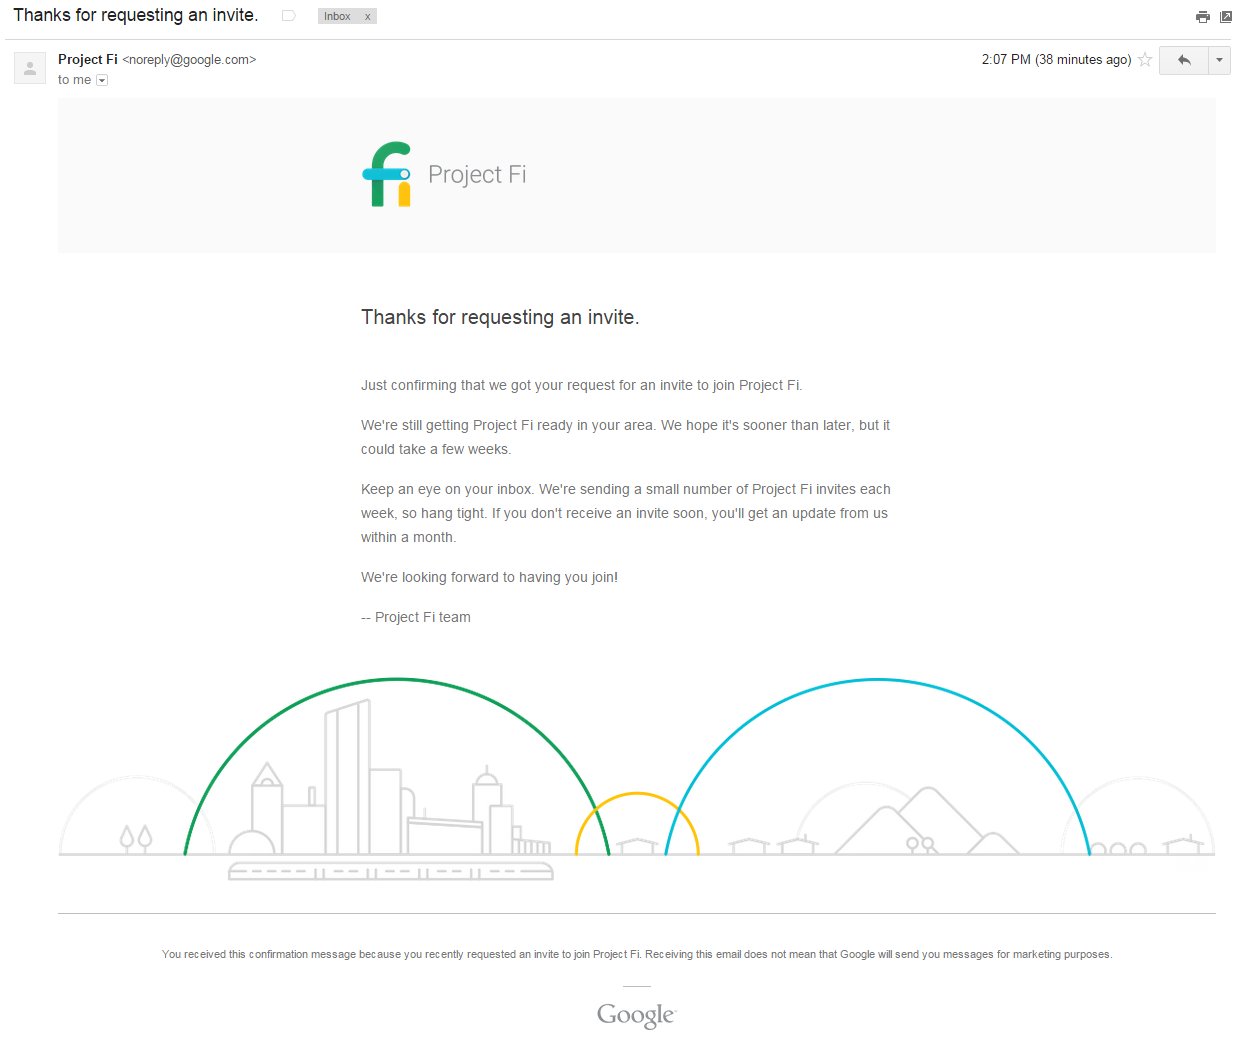 Project Fi email - for some reason we don't have an alt tag here